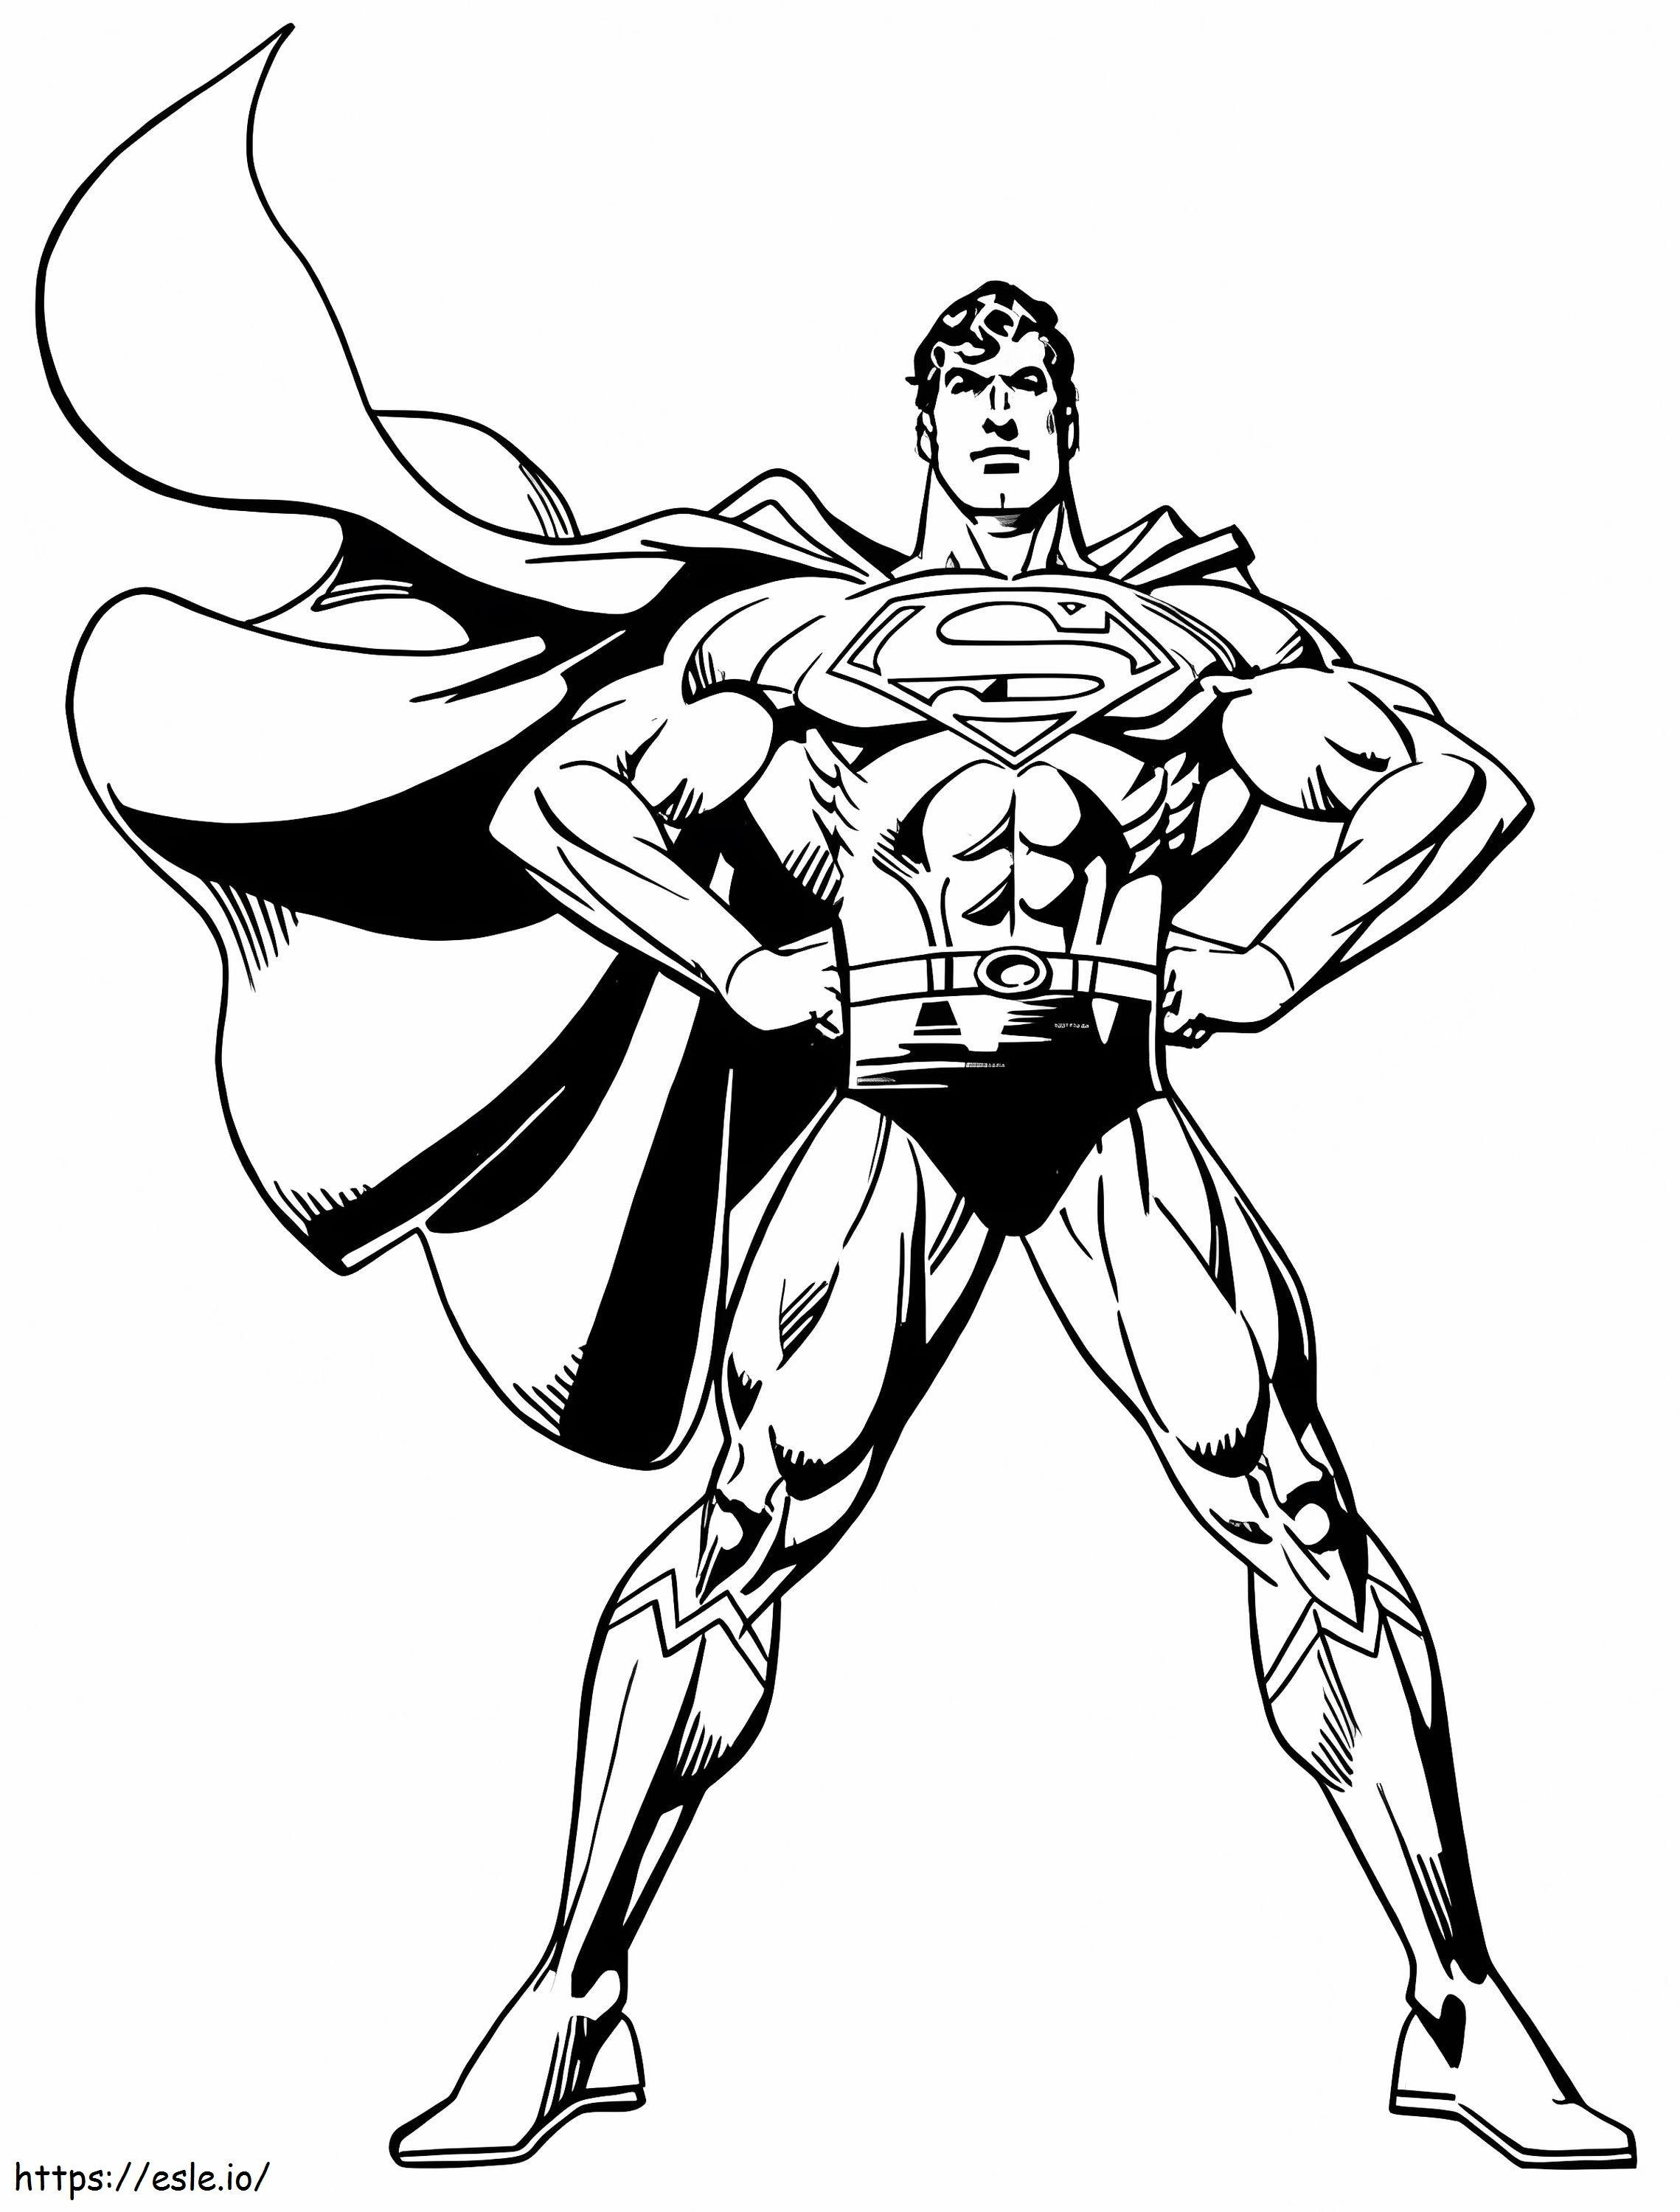 Strong Superman coloring page